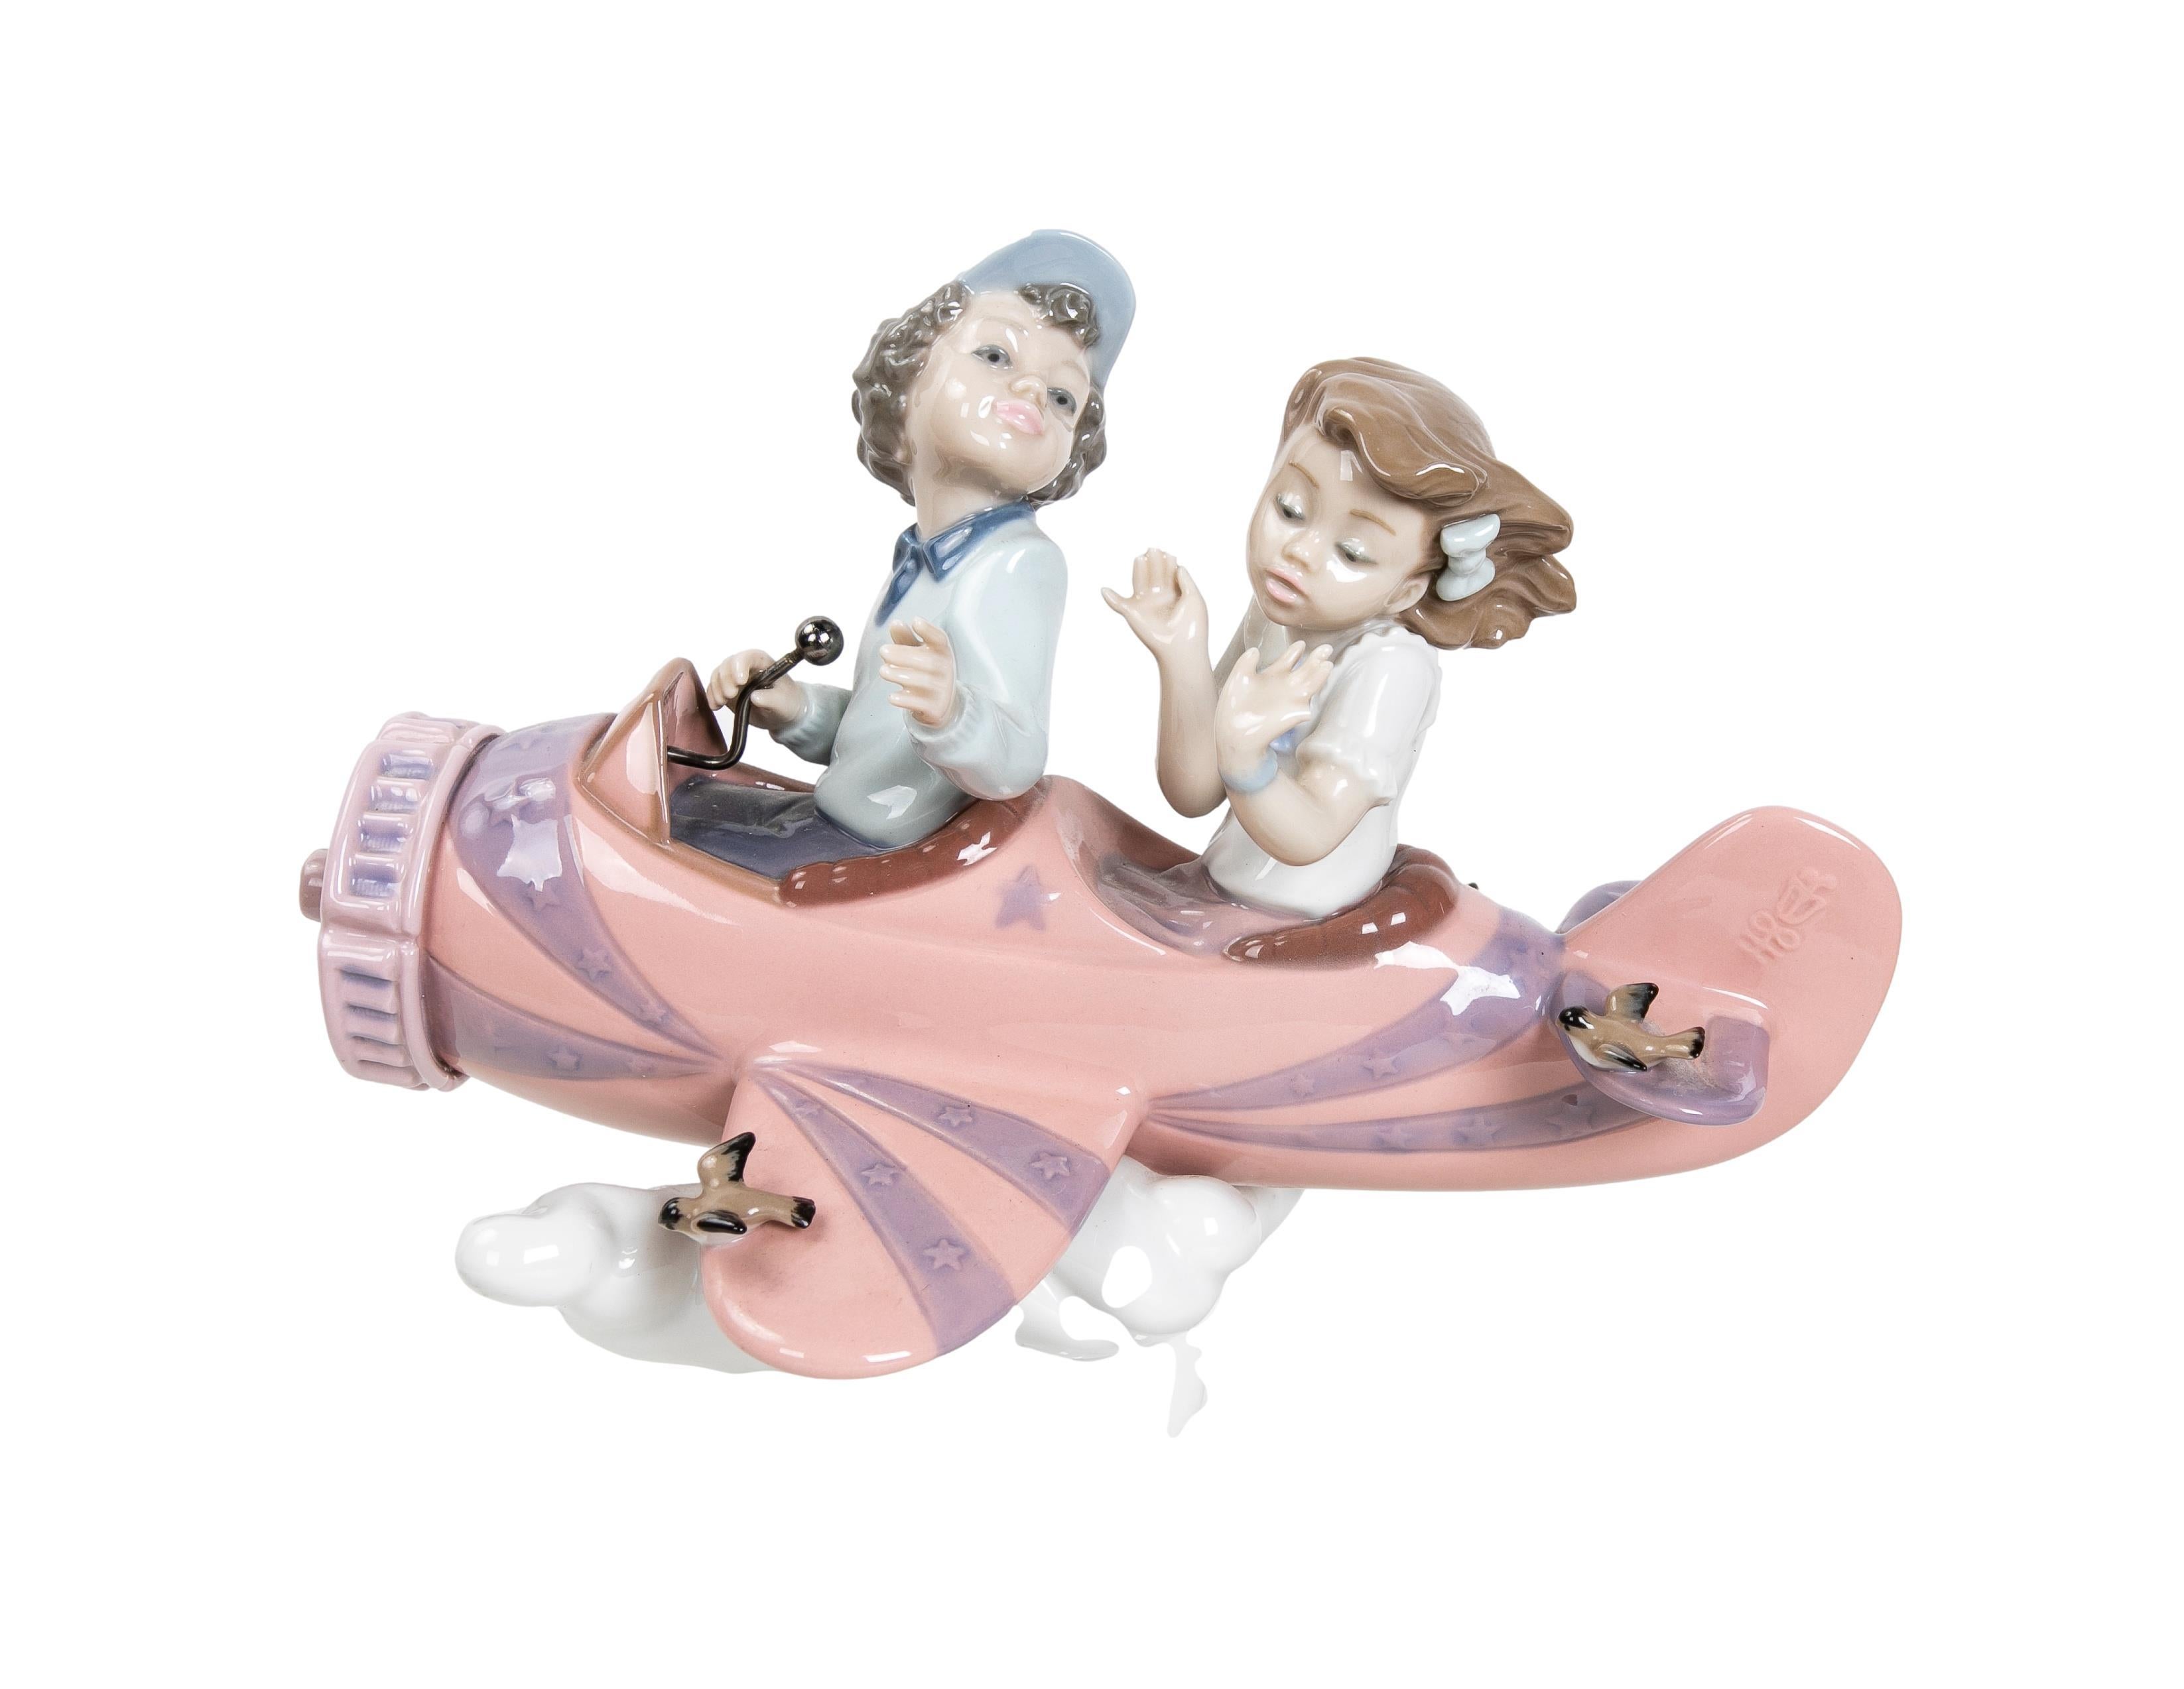 1989 Porcelain figure of children in Airplane signed by the house of LLadró.